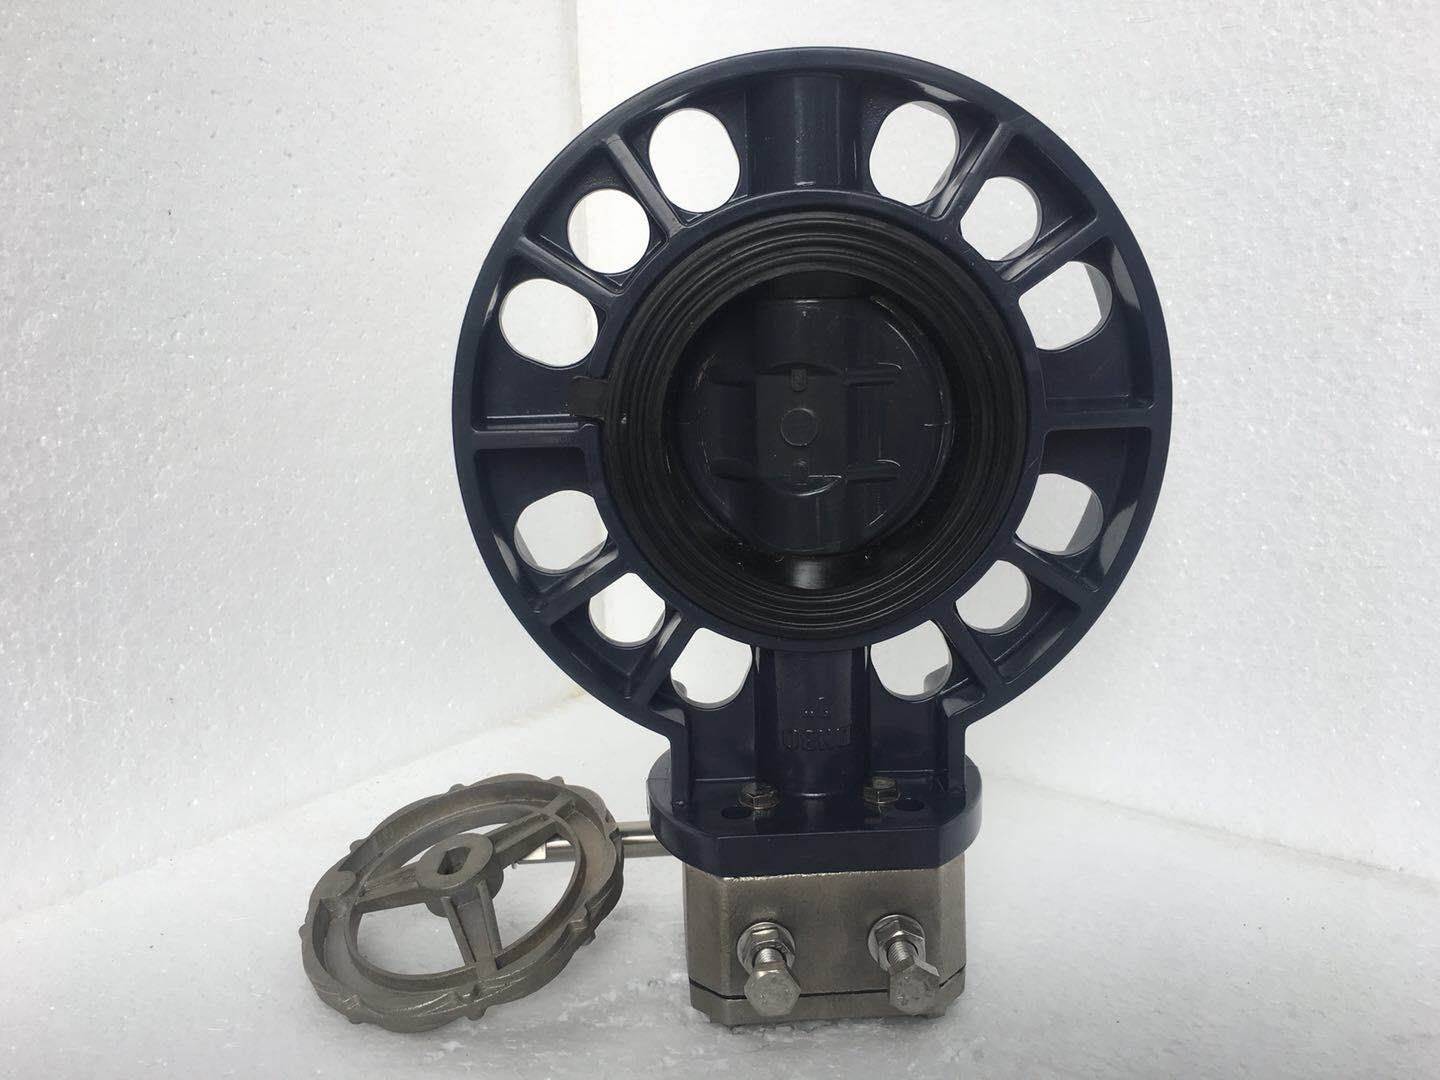 Excellent quality Demco Mud Valve - durable quality stainless steel reduction gearbox pvc butterfly valve – DA YU PLASTIC